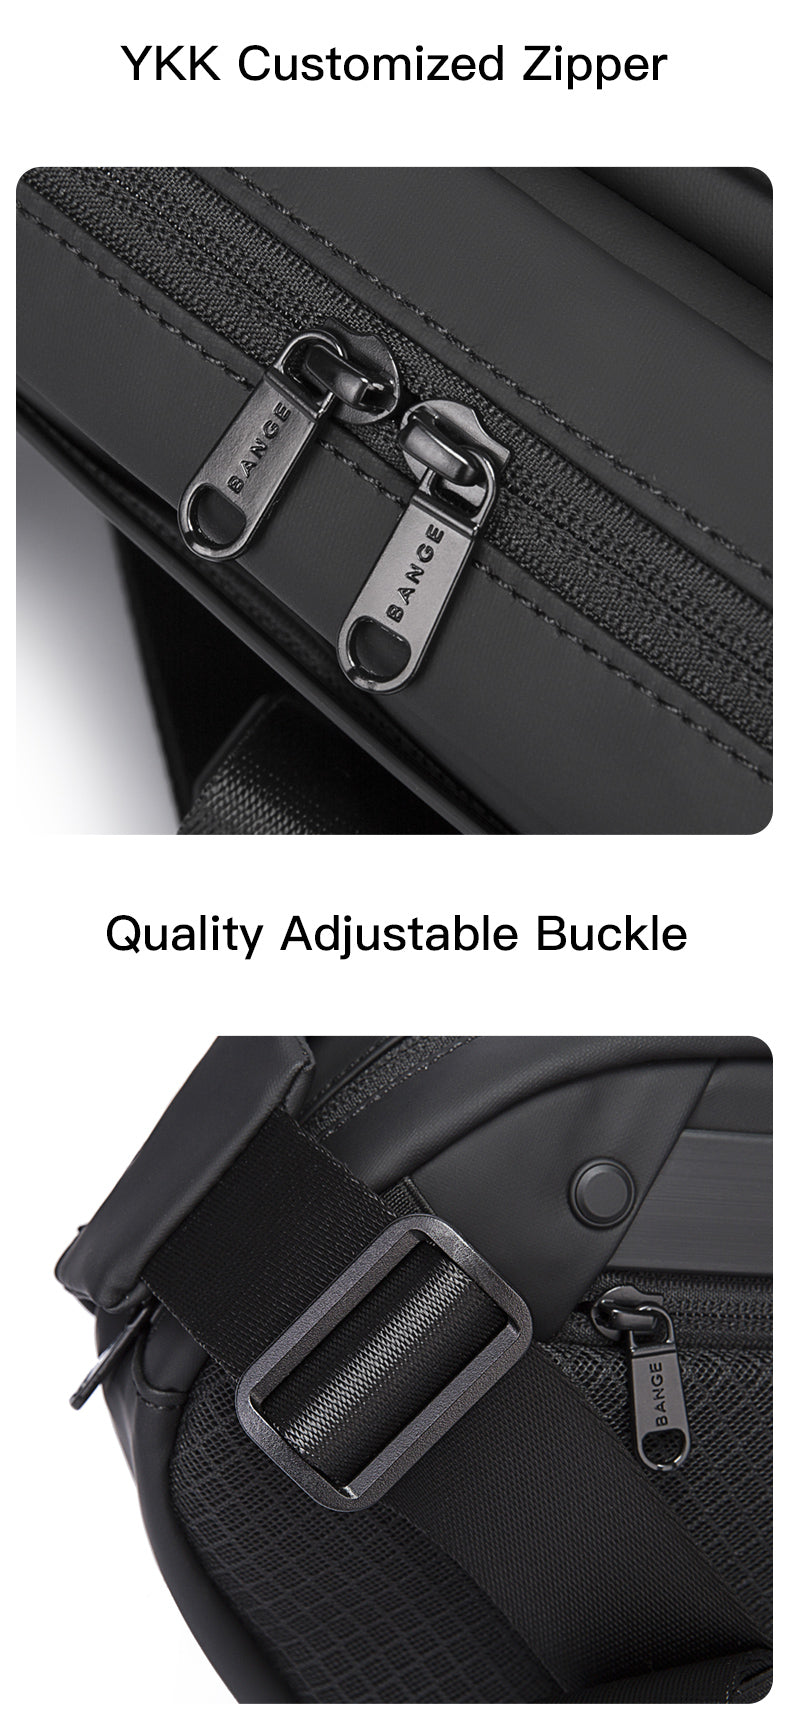 YKK zipper and flexible buckle of this sling bag